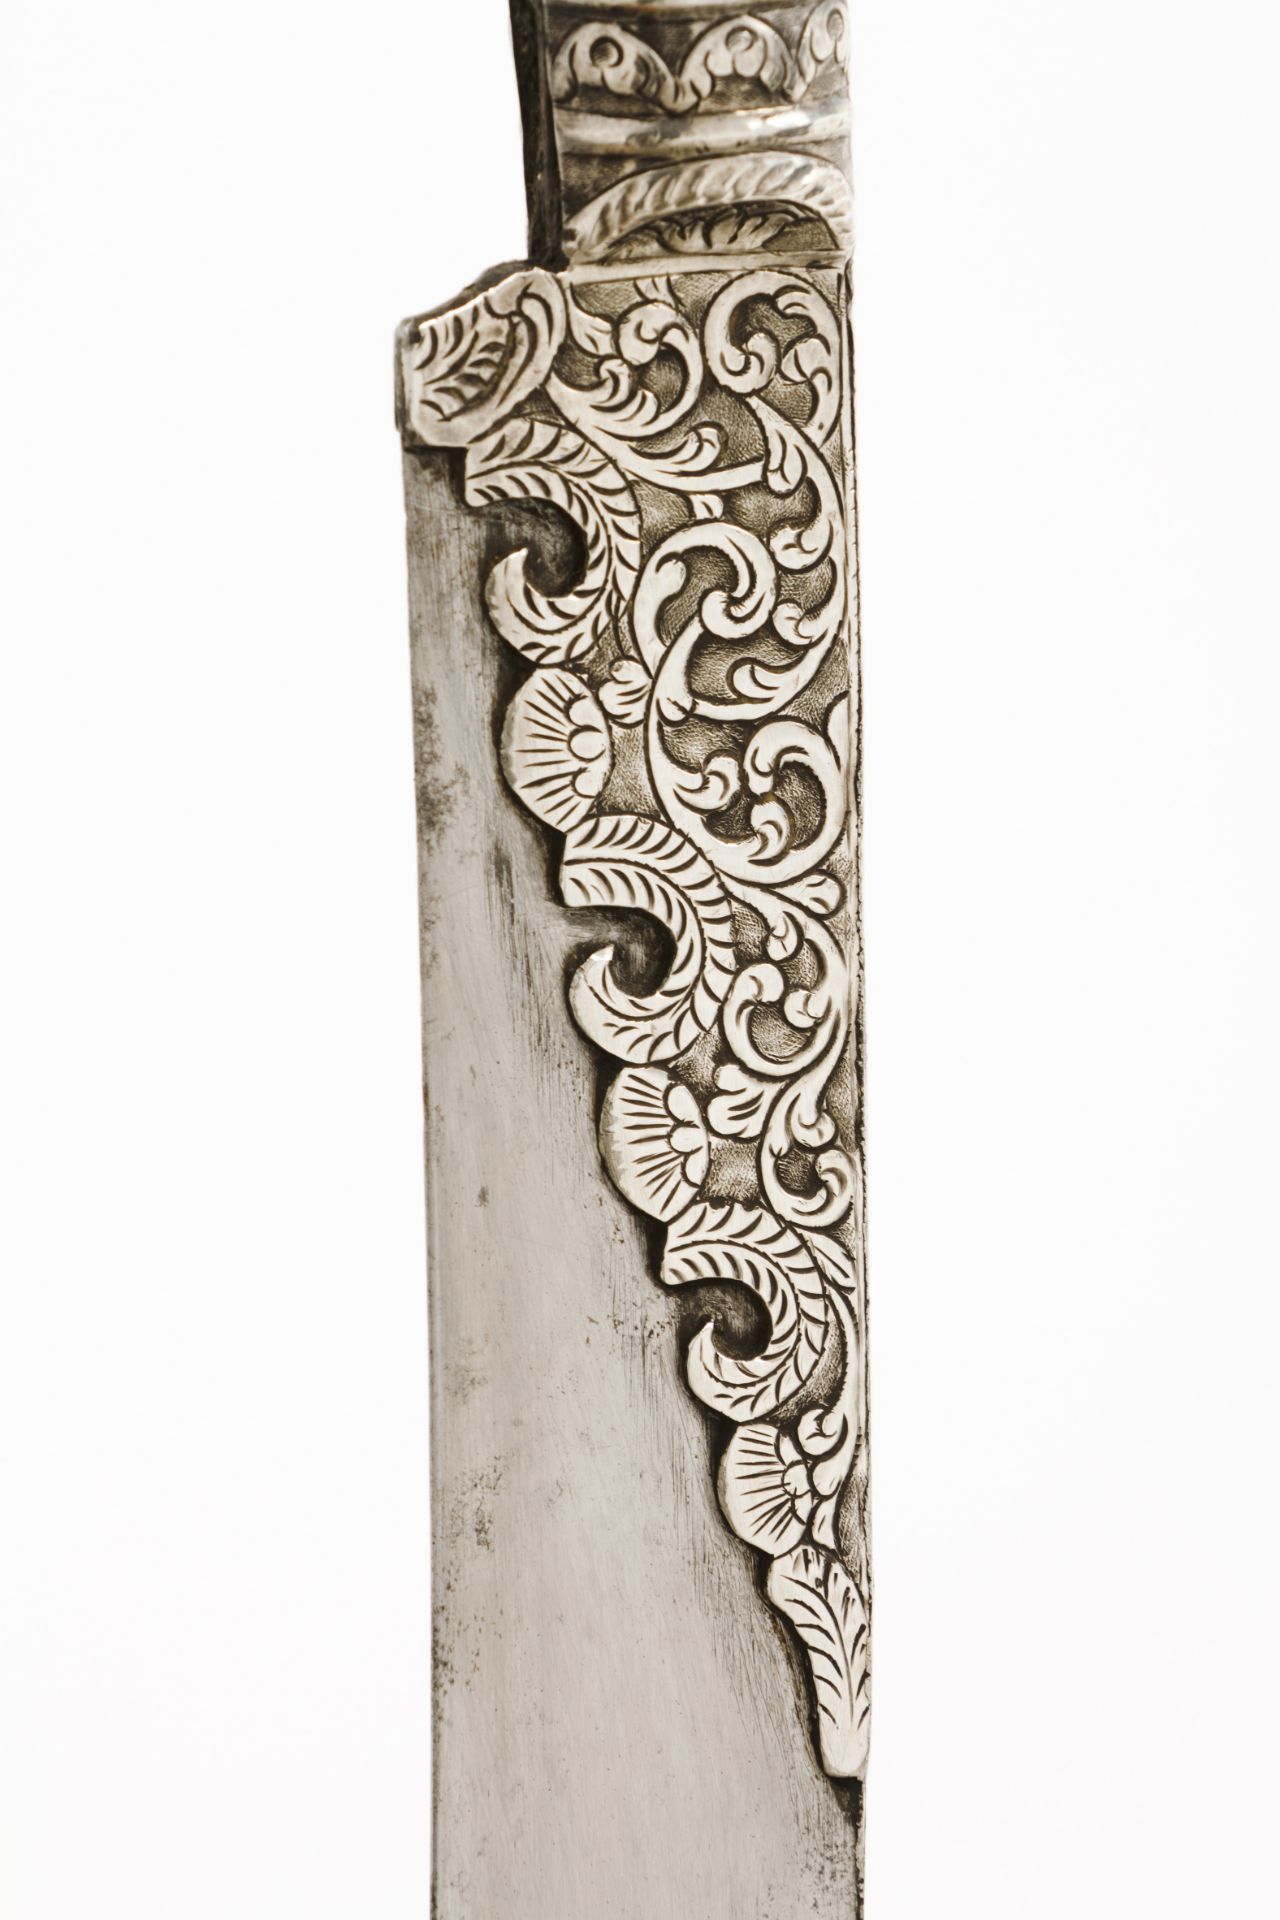 An Ottoman iataghanOttoman silver Camel bone hilt of scalloped and raised applied silver - Image 6 of 6